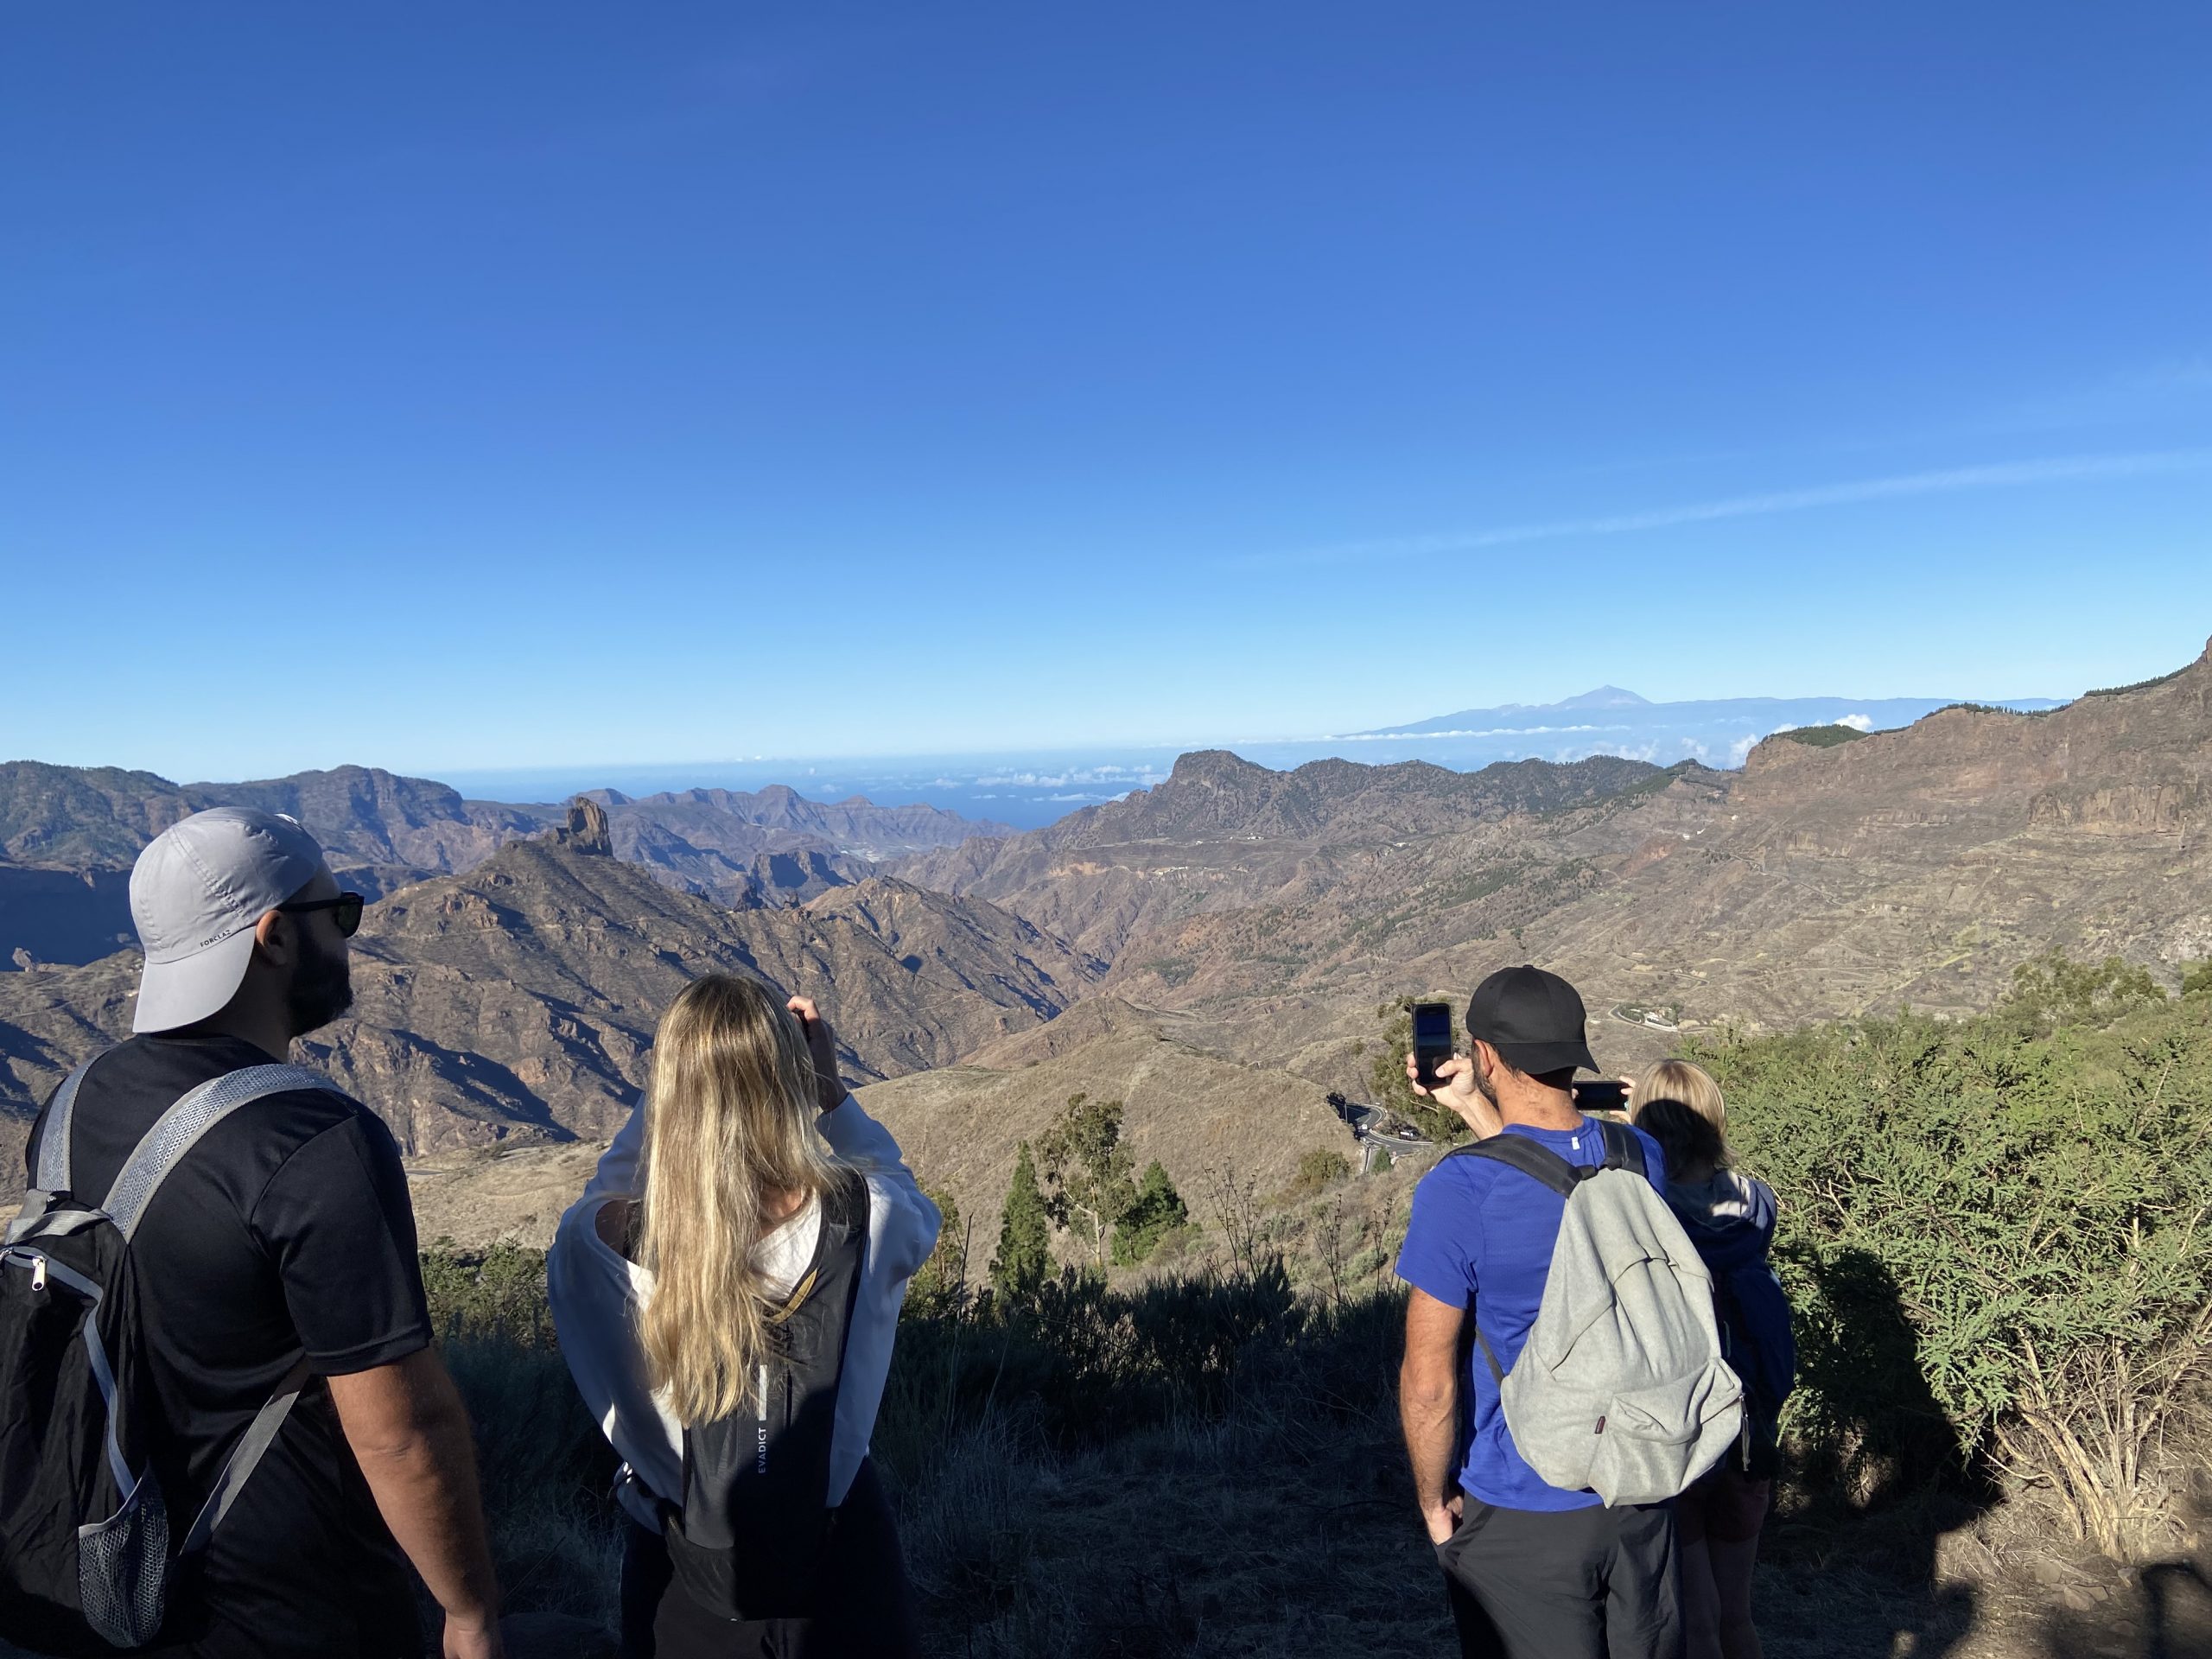 Taking pictures of the landscape of Gran Canaria, amazing views of the island